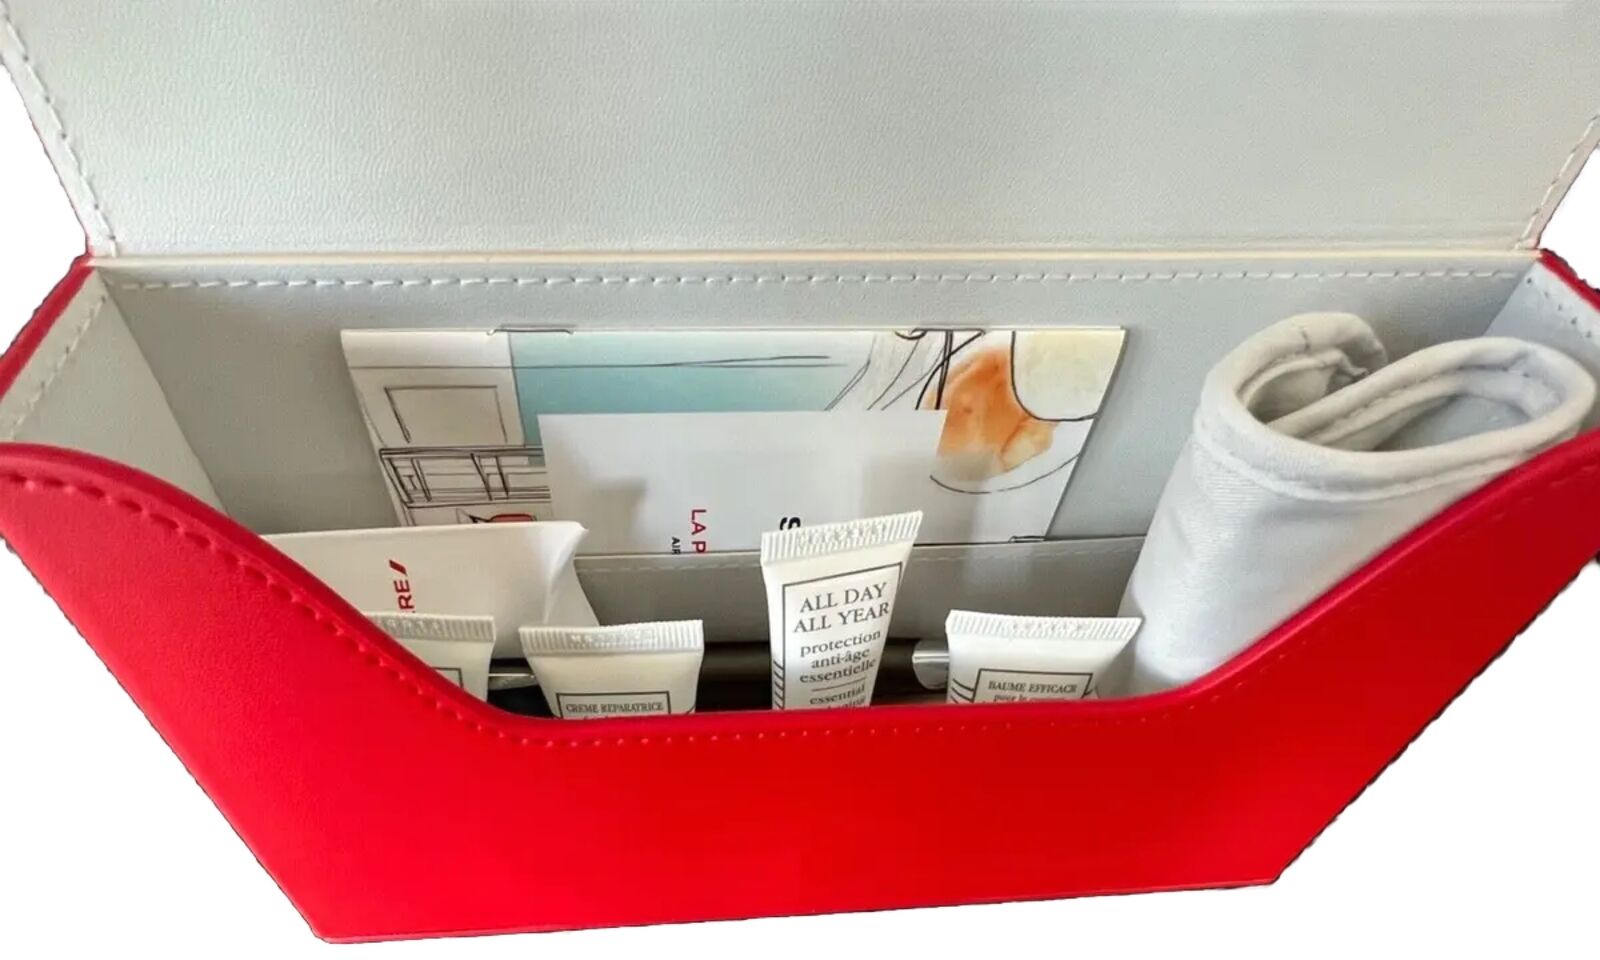 Air France La Premiere/First Class Latest Luxury Amenity Kit Air France RED Rare